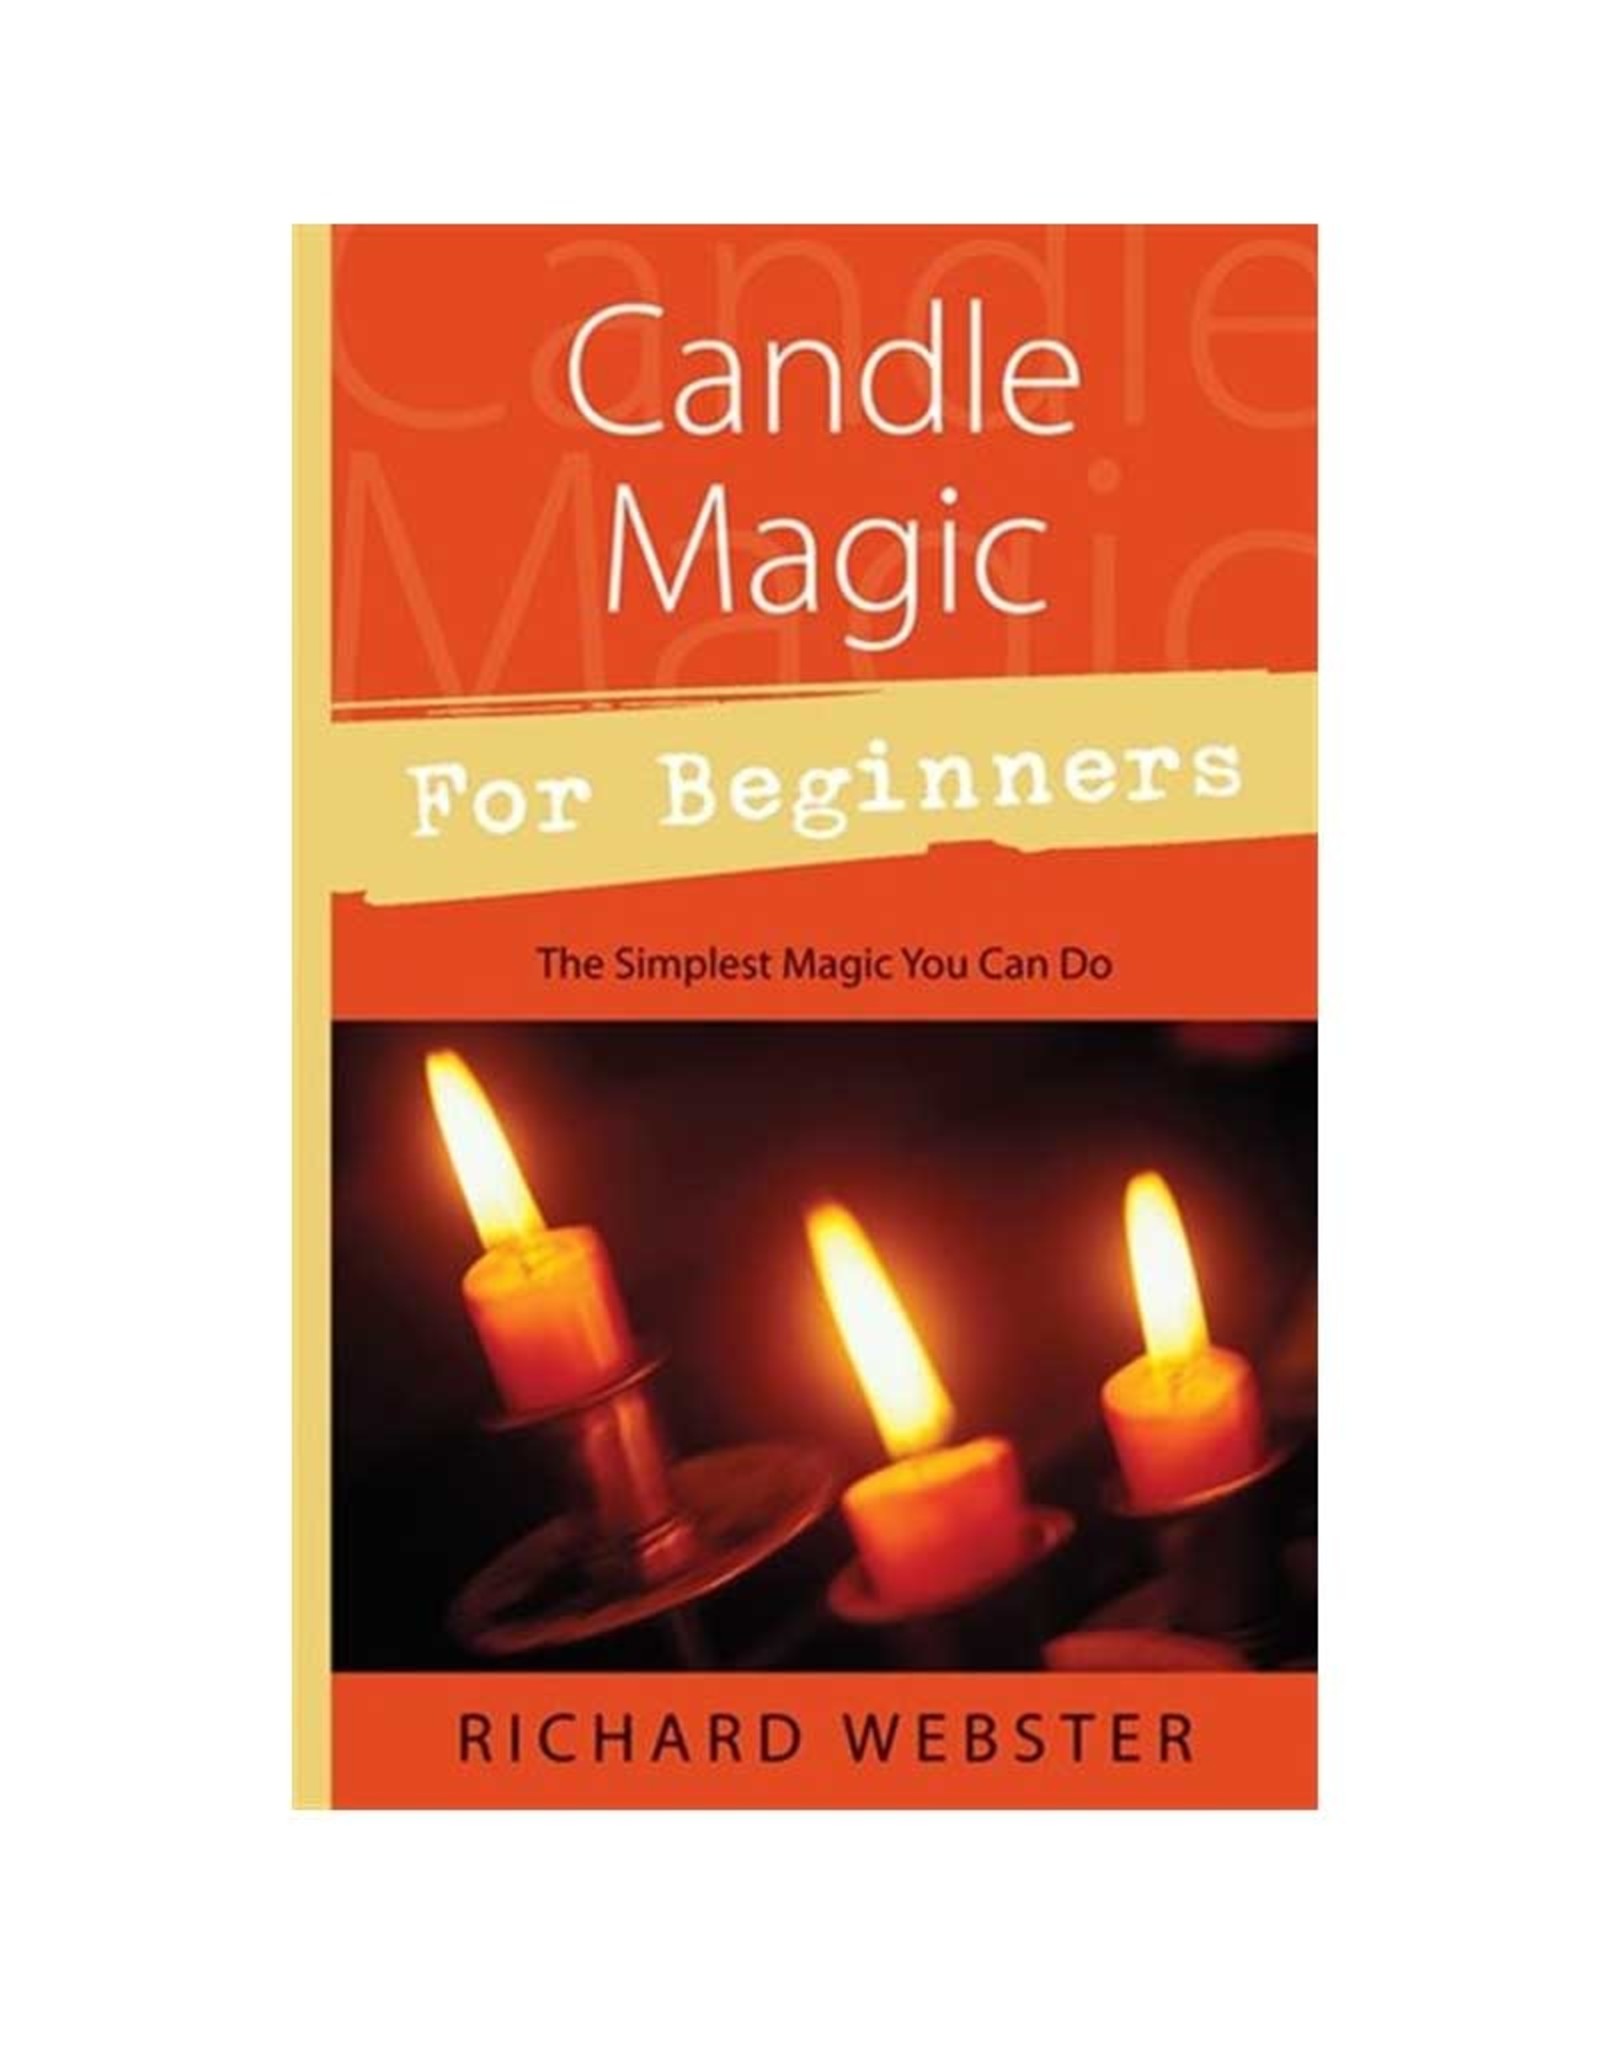 Richard Webster Candle Magic for Beginners by Richard Webster